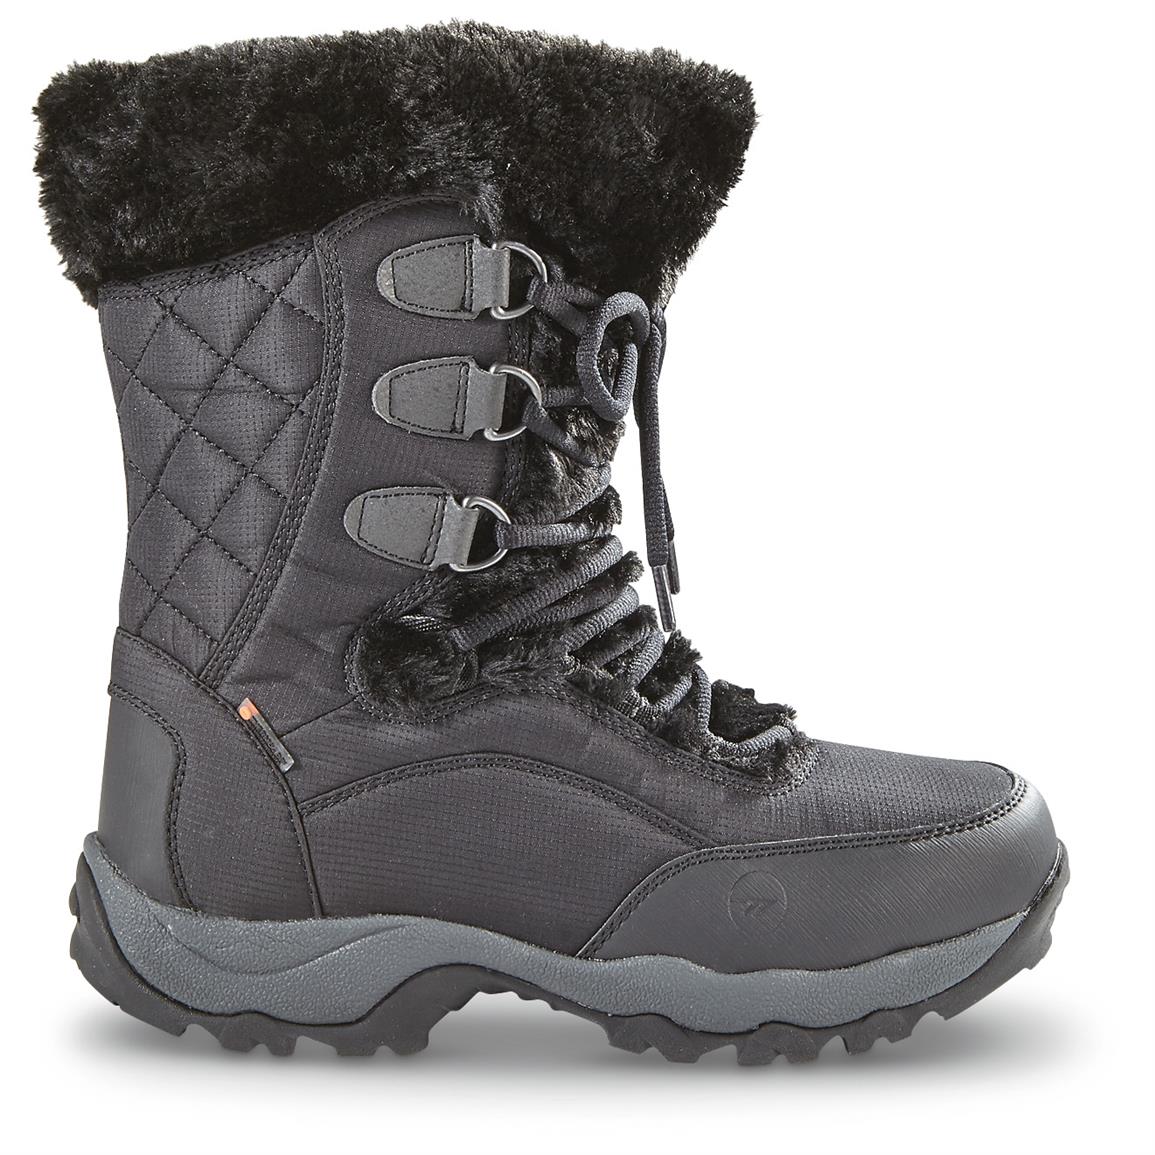 Wolverine Work Boots Composite Toe: 200 Grams Of Insulation Boots